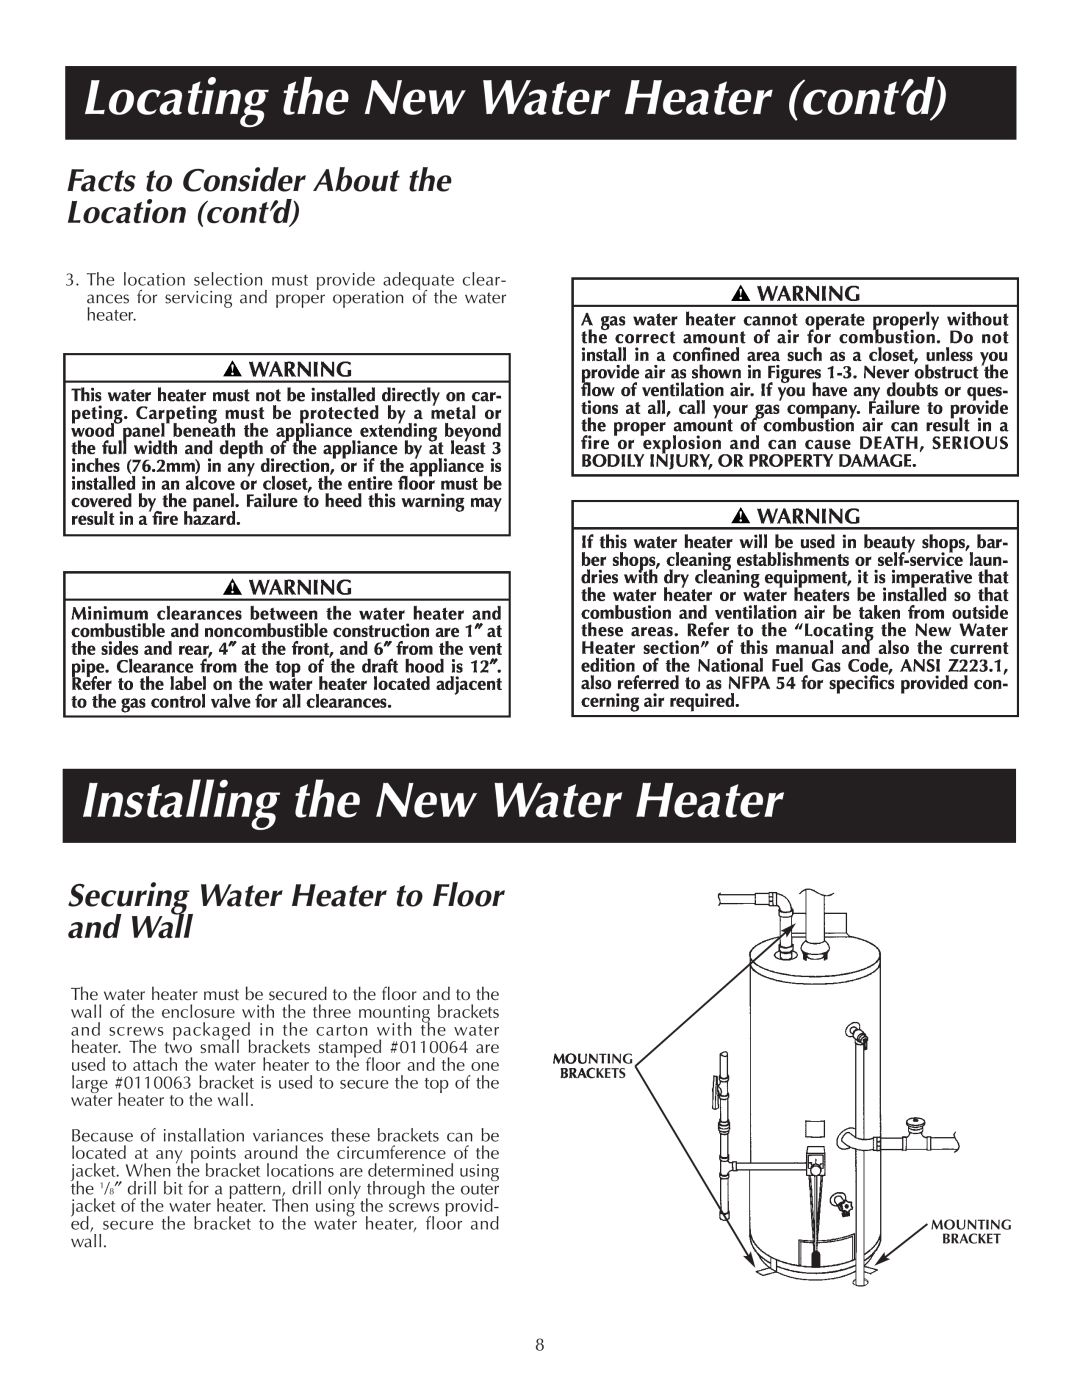 Reliance Water Heaters 184123-000 instruction manual Locating the New Water Heater cont’d, Installing the New Water Heater 